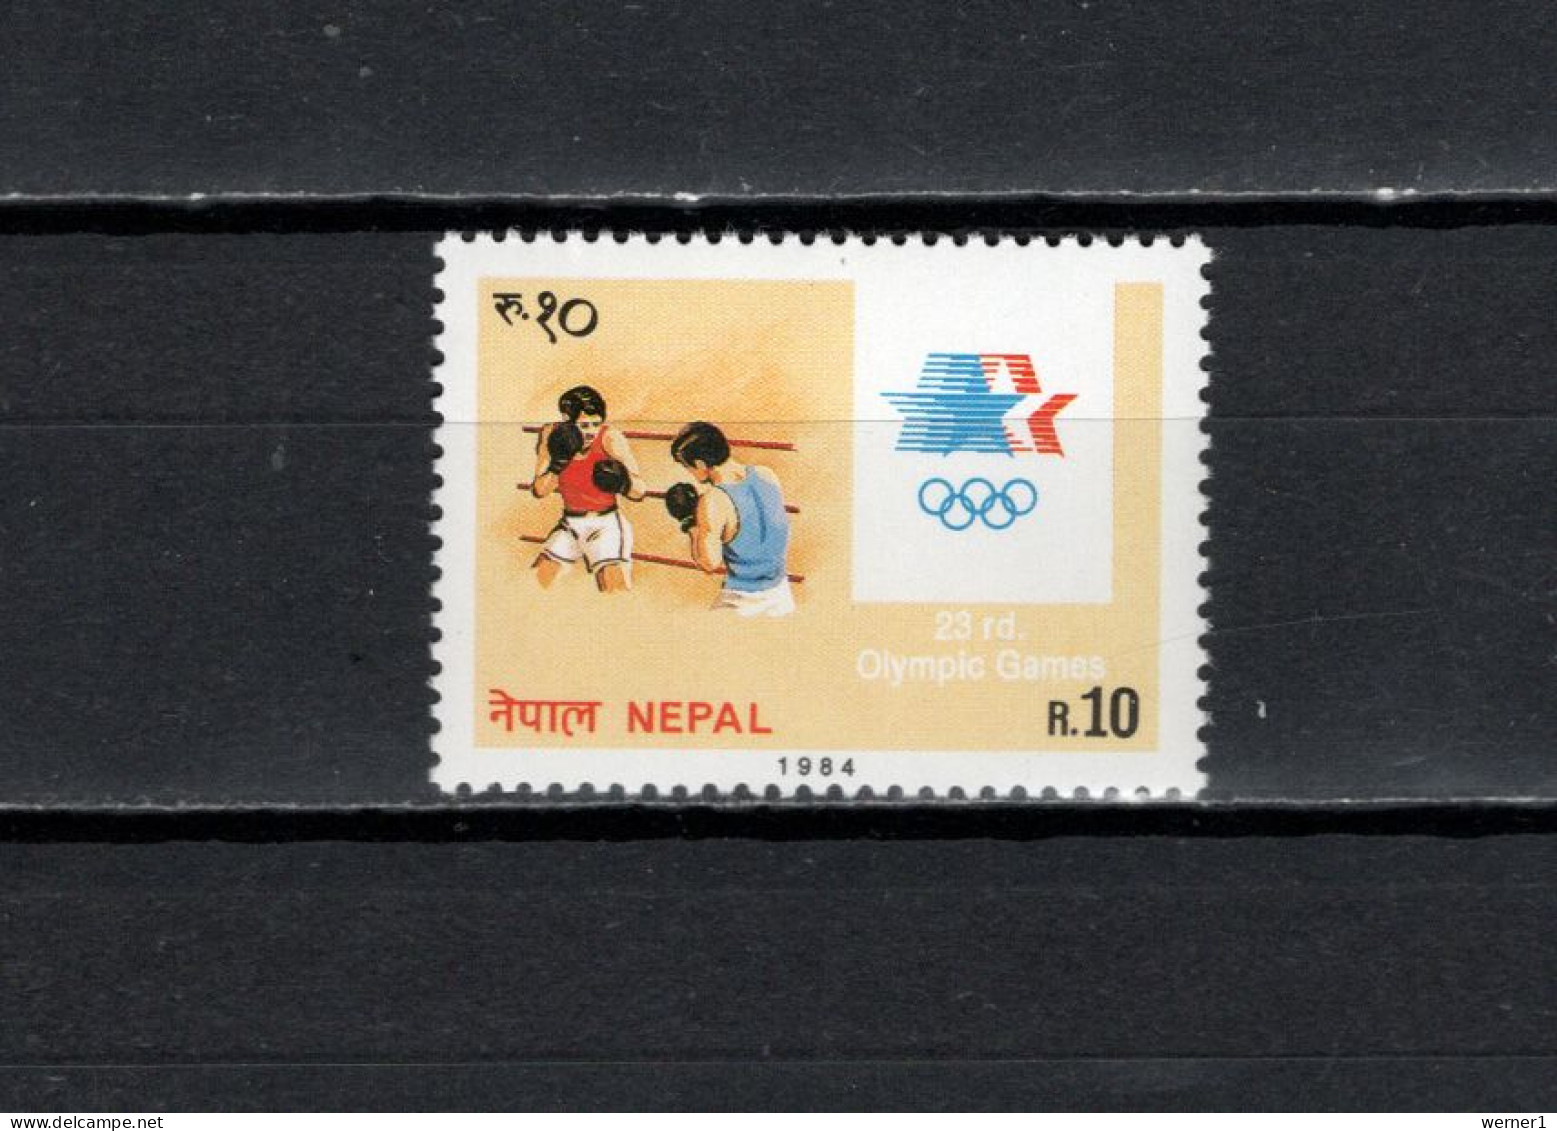 Nepal 1984 Olympic Games Los Angeles, Boxing Stamp MNH - Sommer 1984: Los Angeles